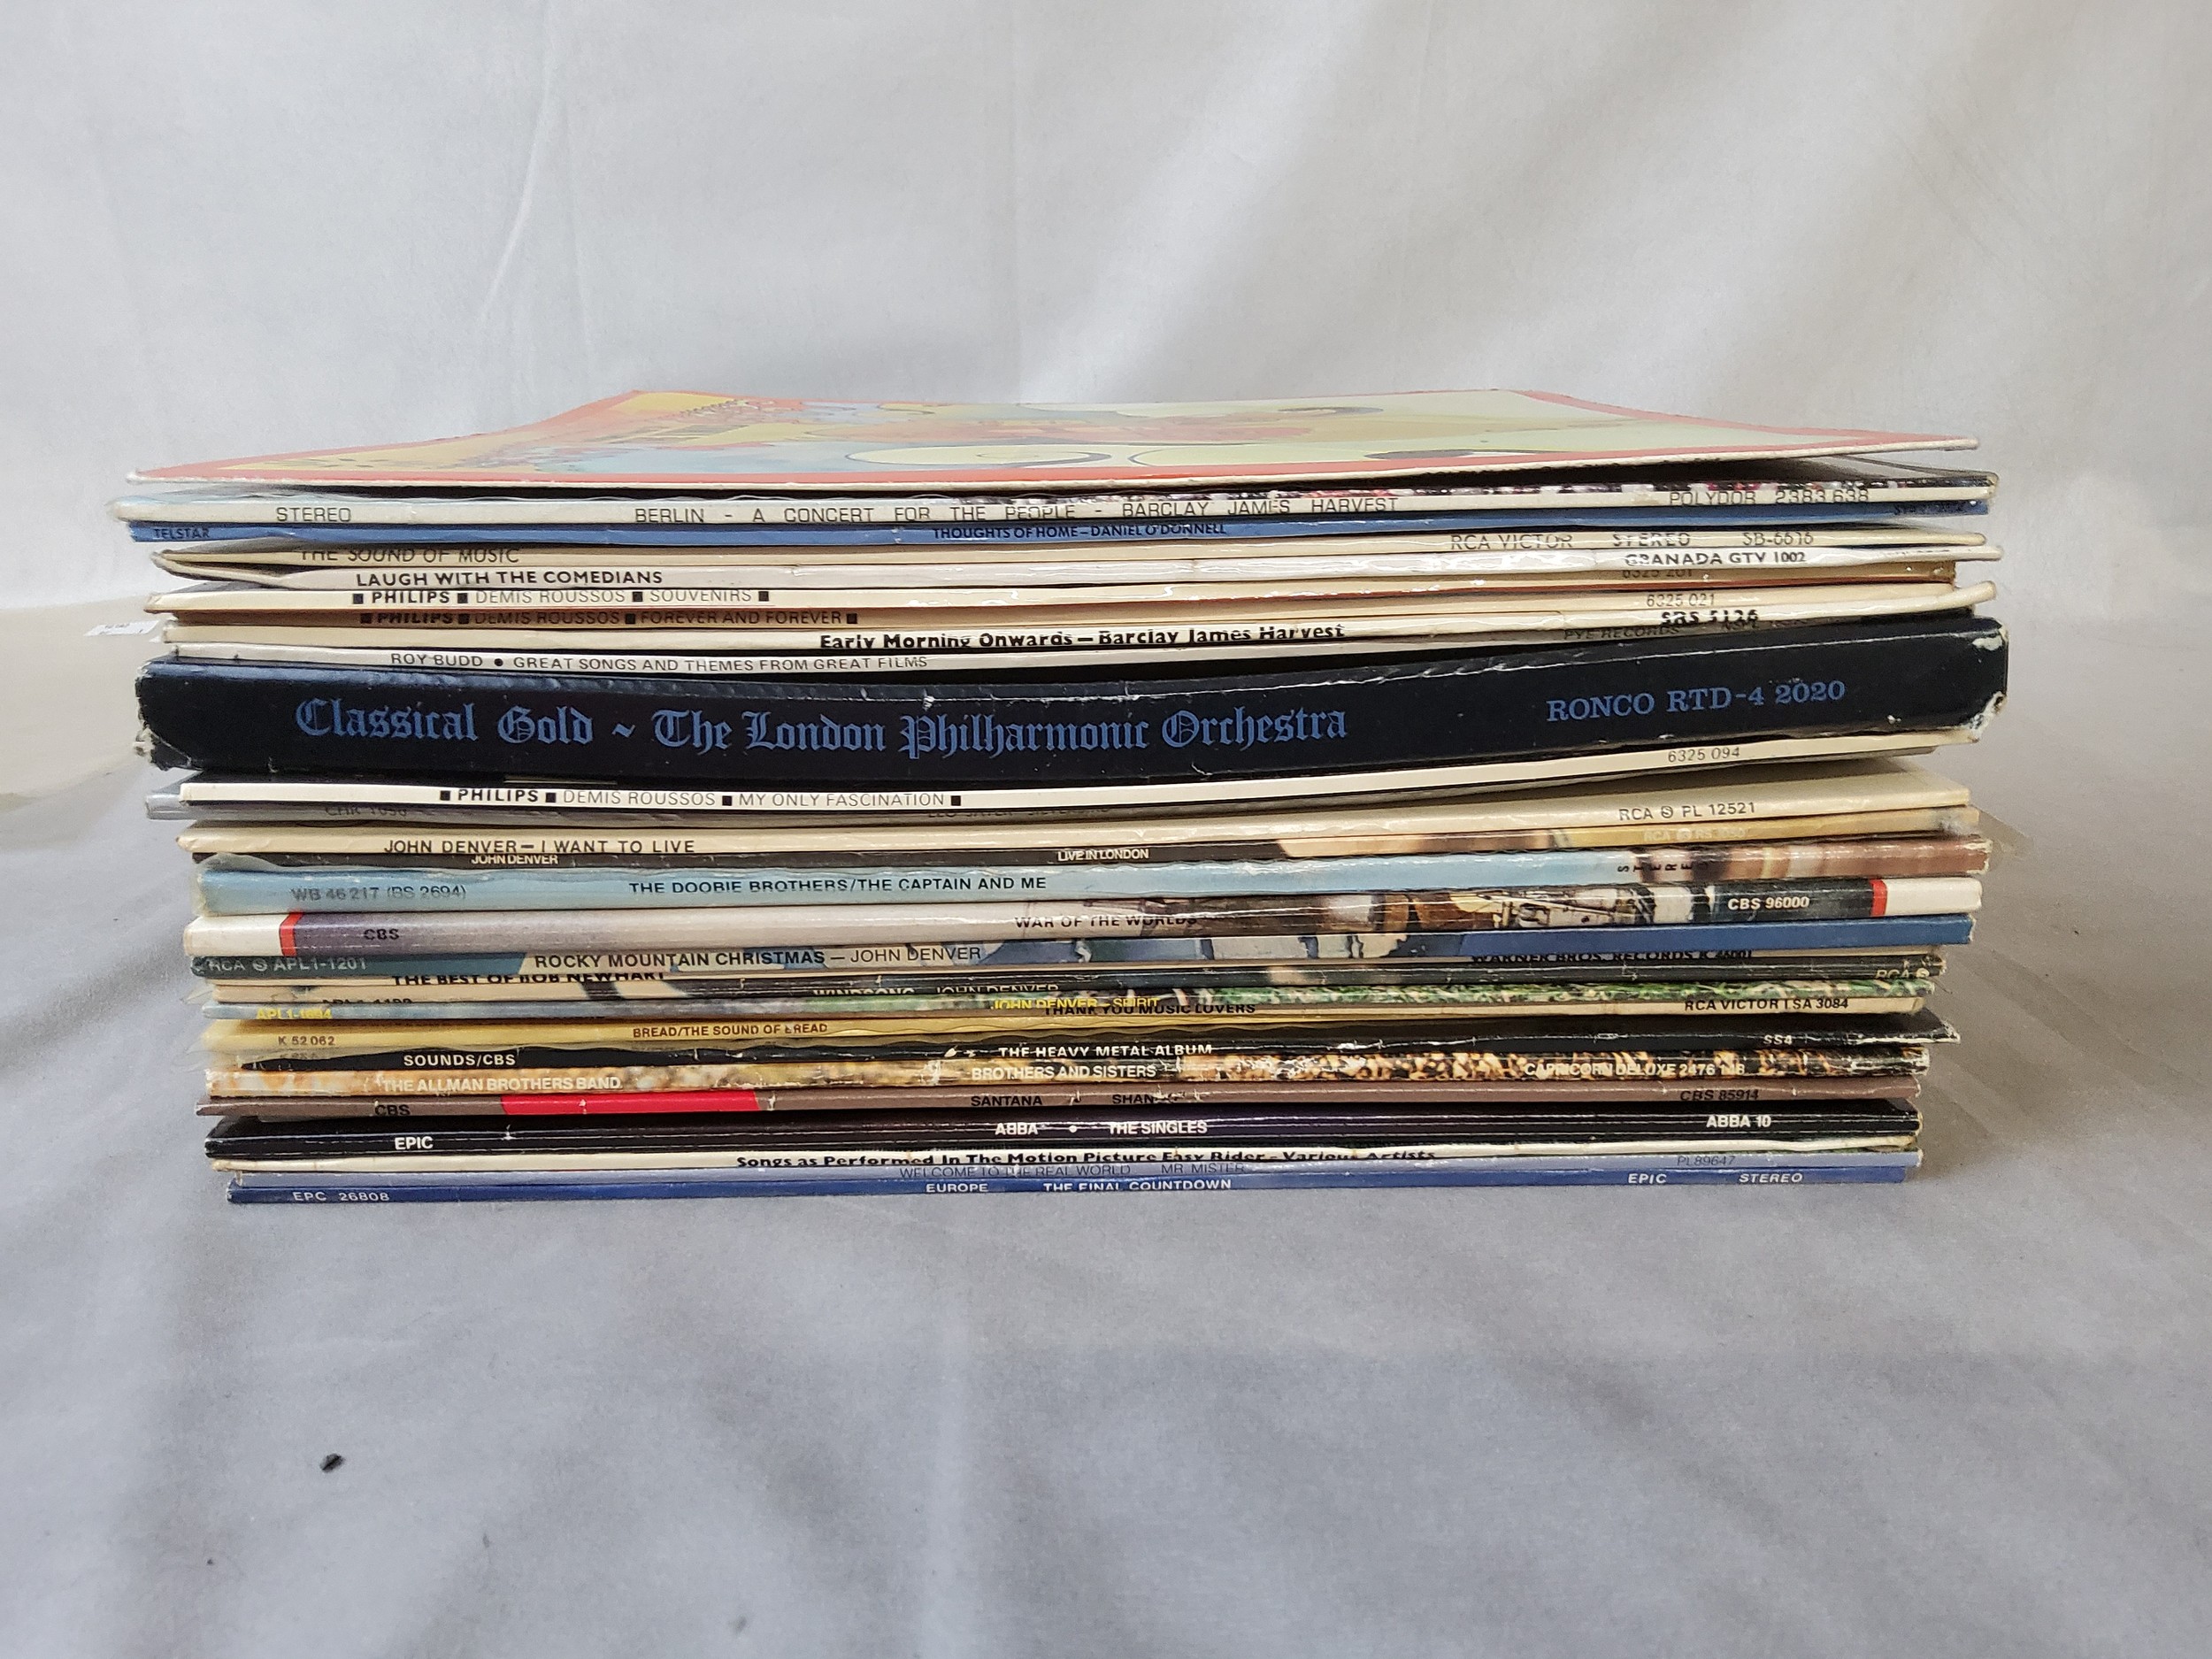 Vinyl Lp's including The Allman Brothers, The Doobie Brothers, Europe, Barclay James Harvest, - Image 2 of 2